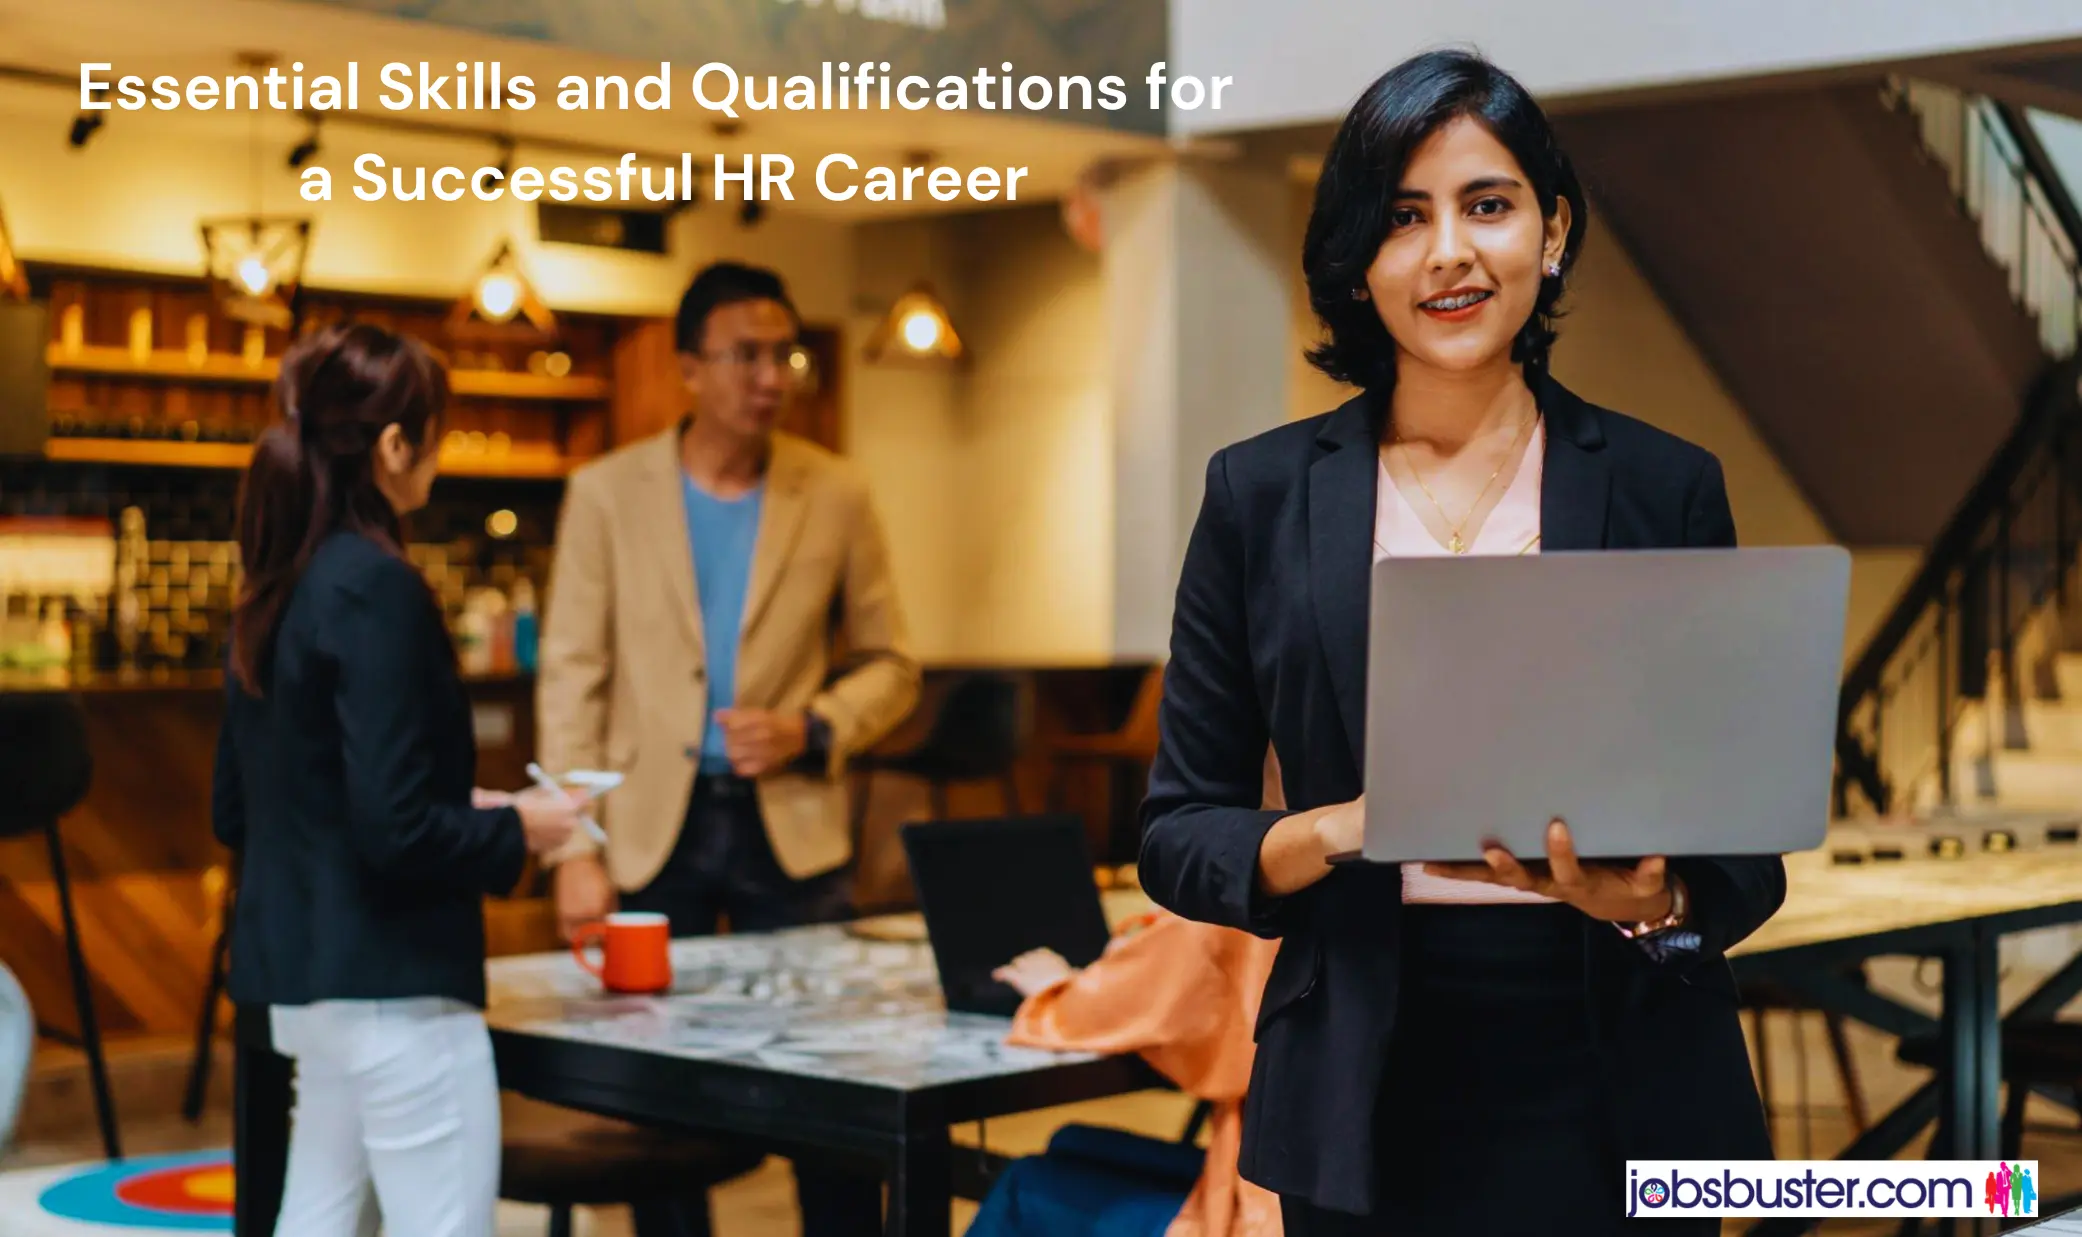 Essential Skills and Qualifications for a Successful HR Career